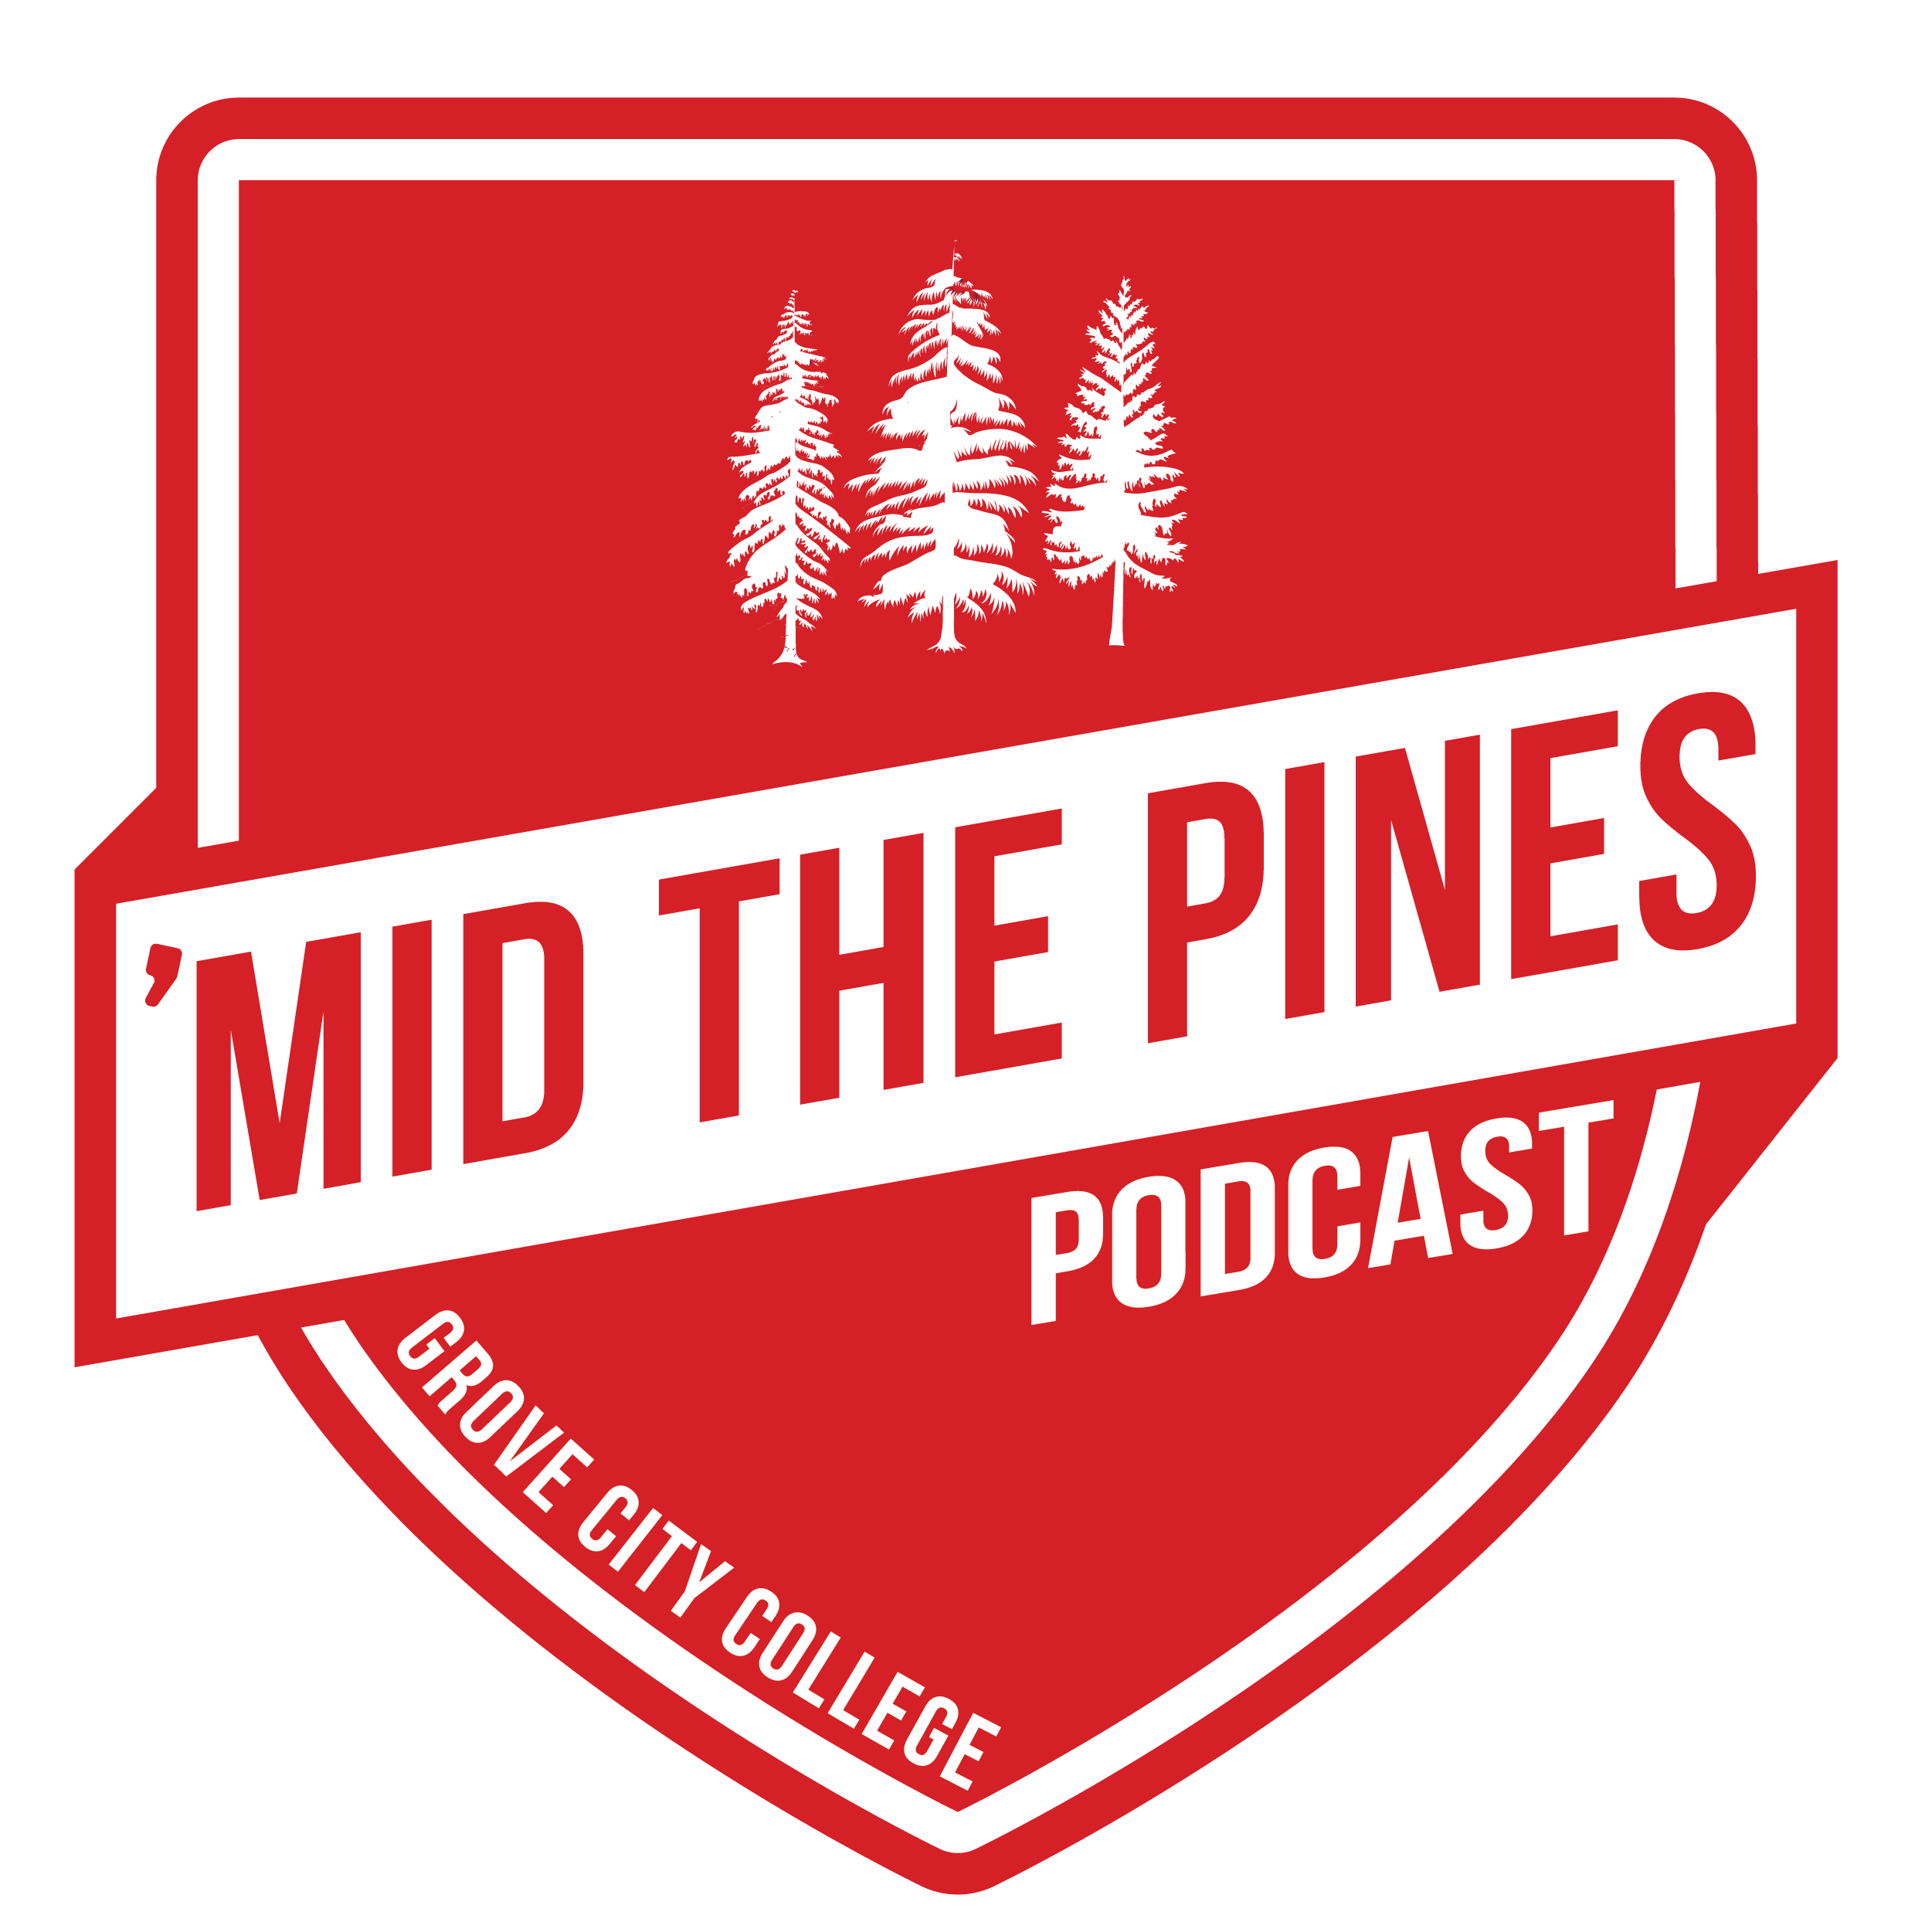 ’Mid the Pines Podcast